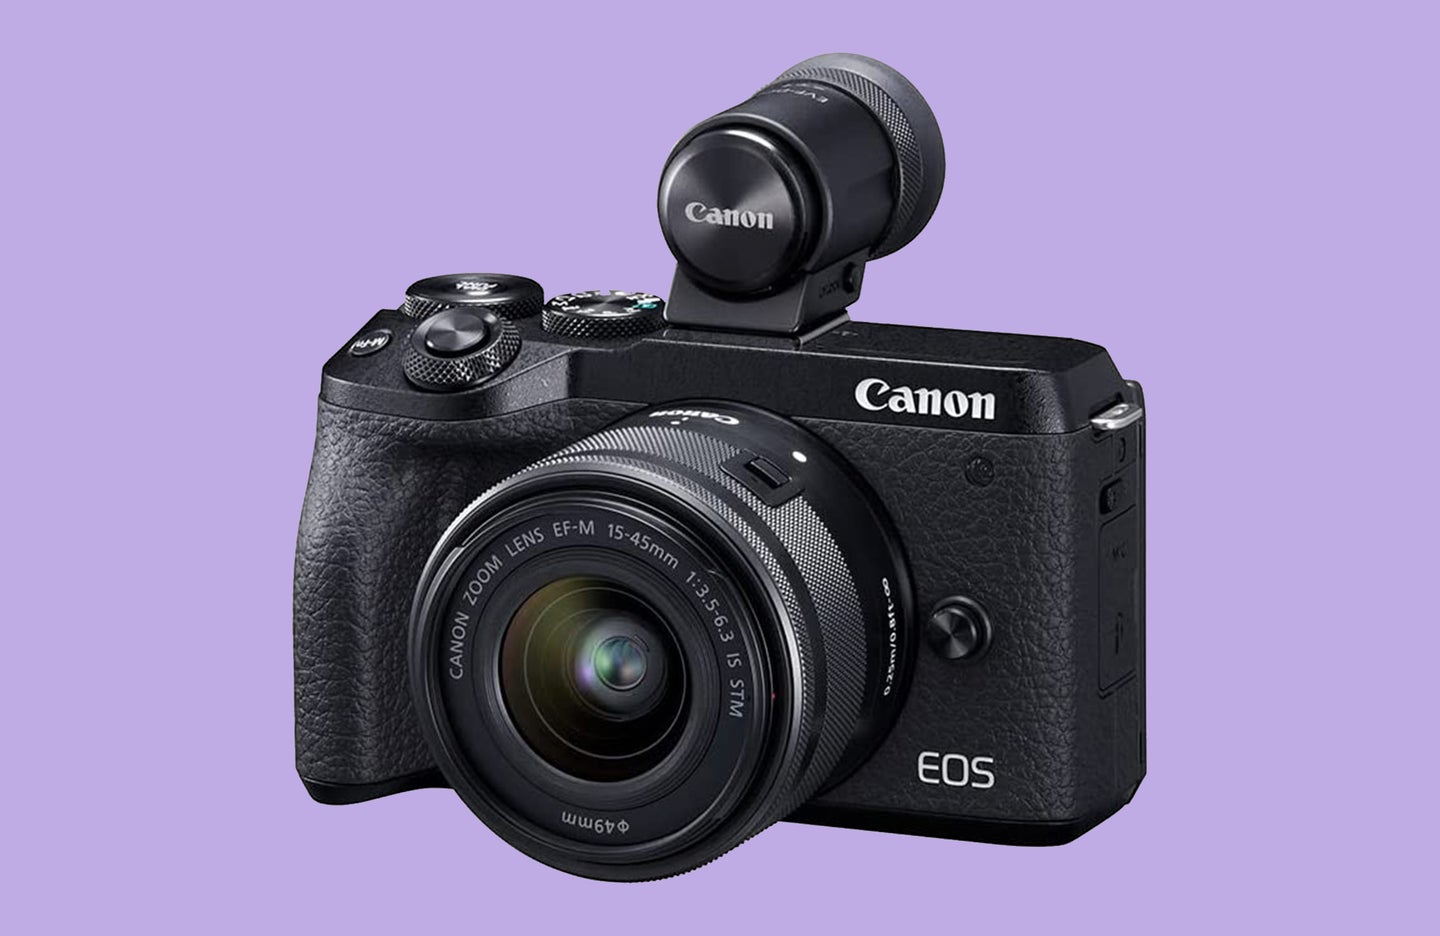 Save on the Canon EOS M6 Mark II during the Amazon Prime Early Access sale.